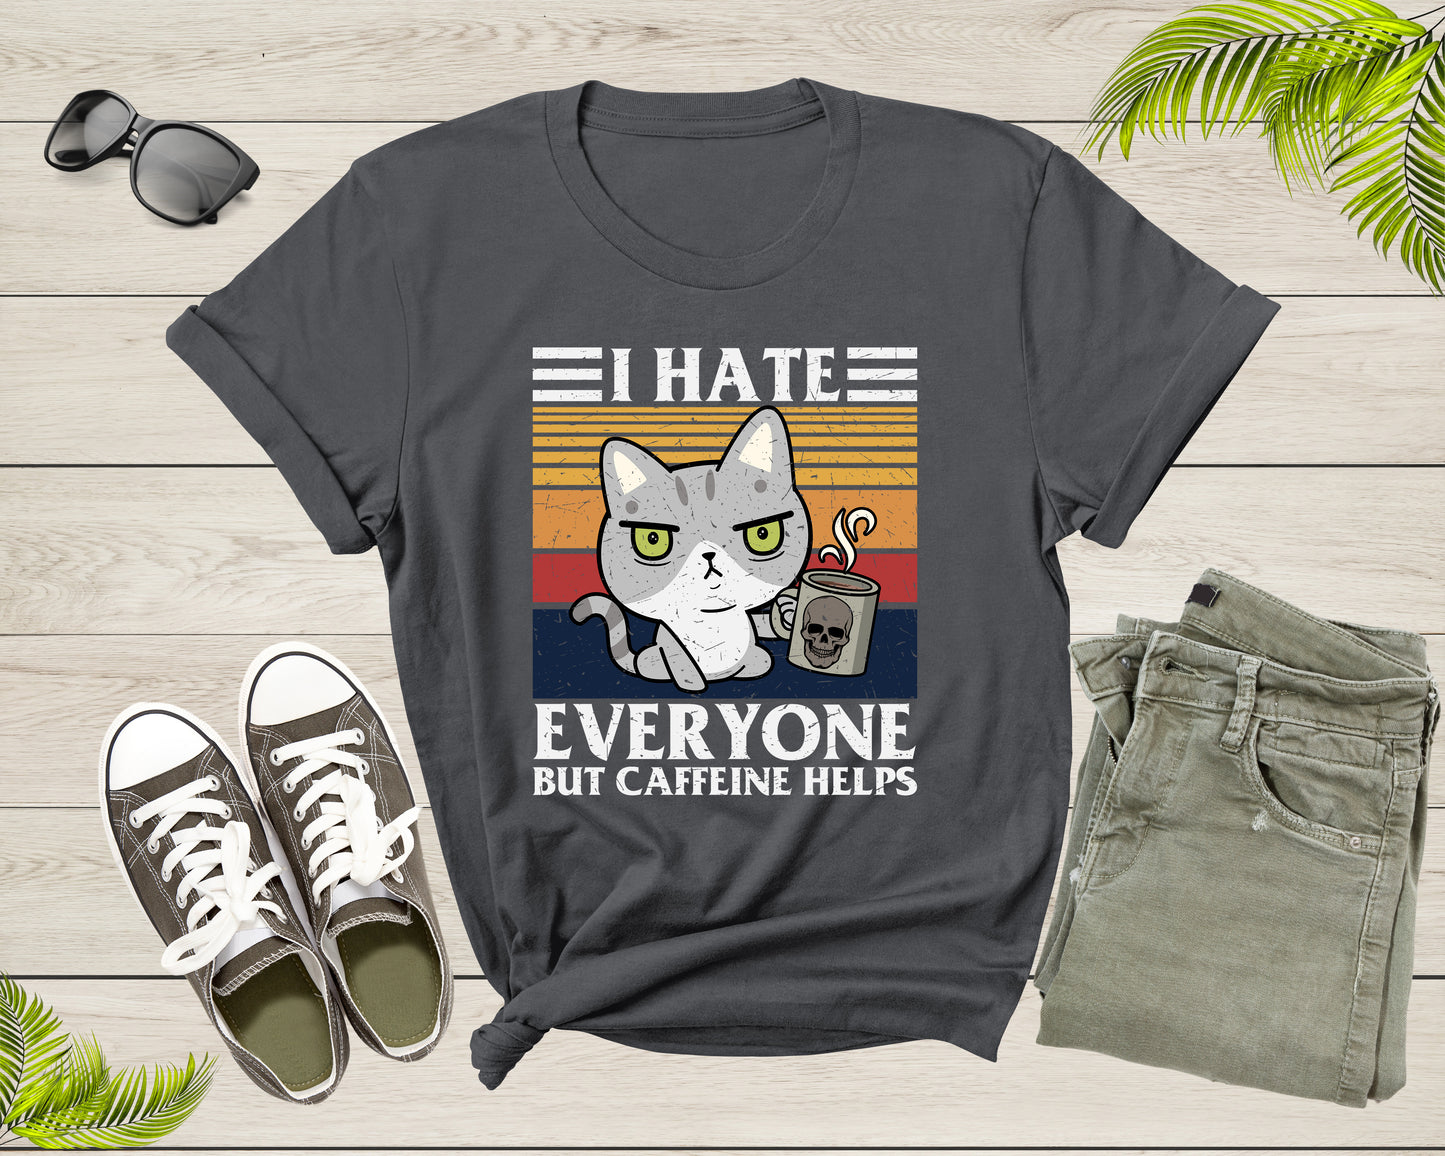 I Hate Everyone But Caffeine Helps Funny Sarcastic Angry Cat T-Shirt Angry Cat Lover Gift T Shirt for Men Women Kids Boys Girls Tshirt